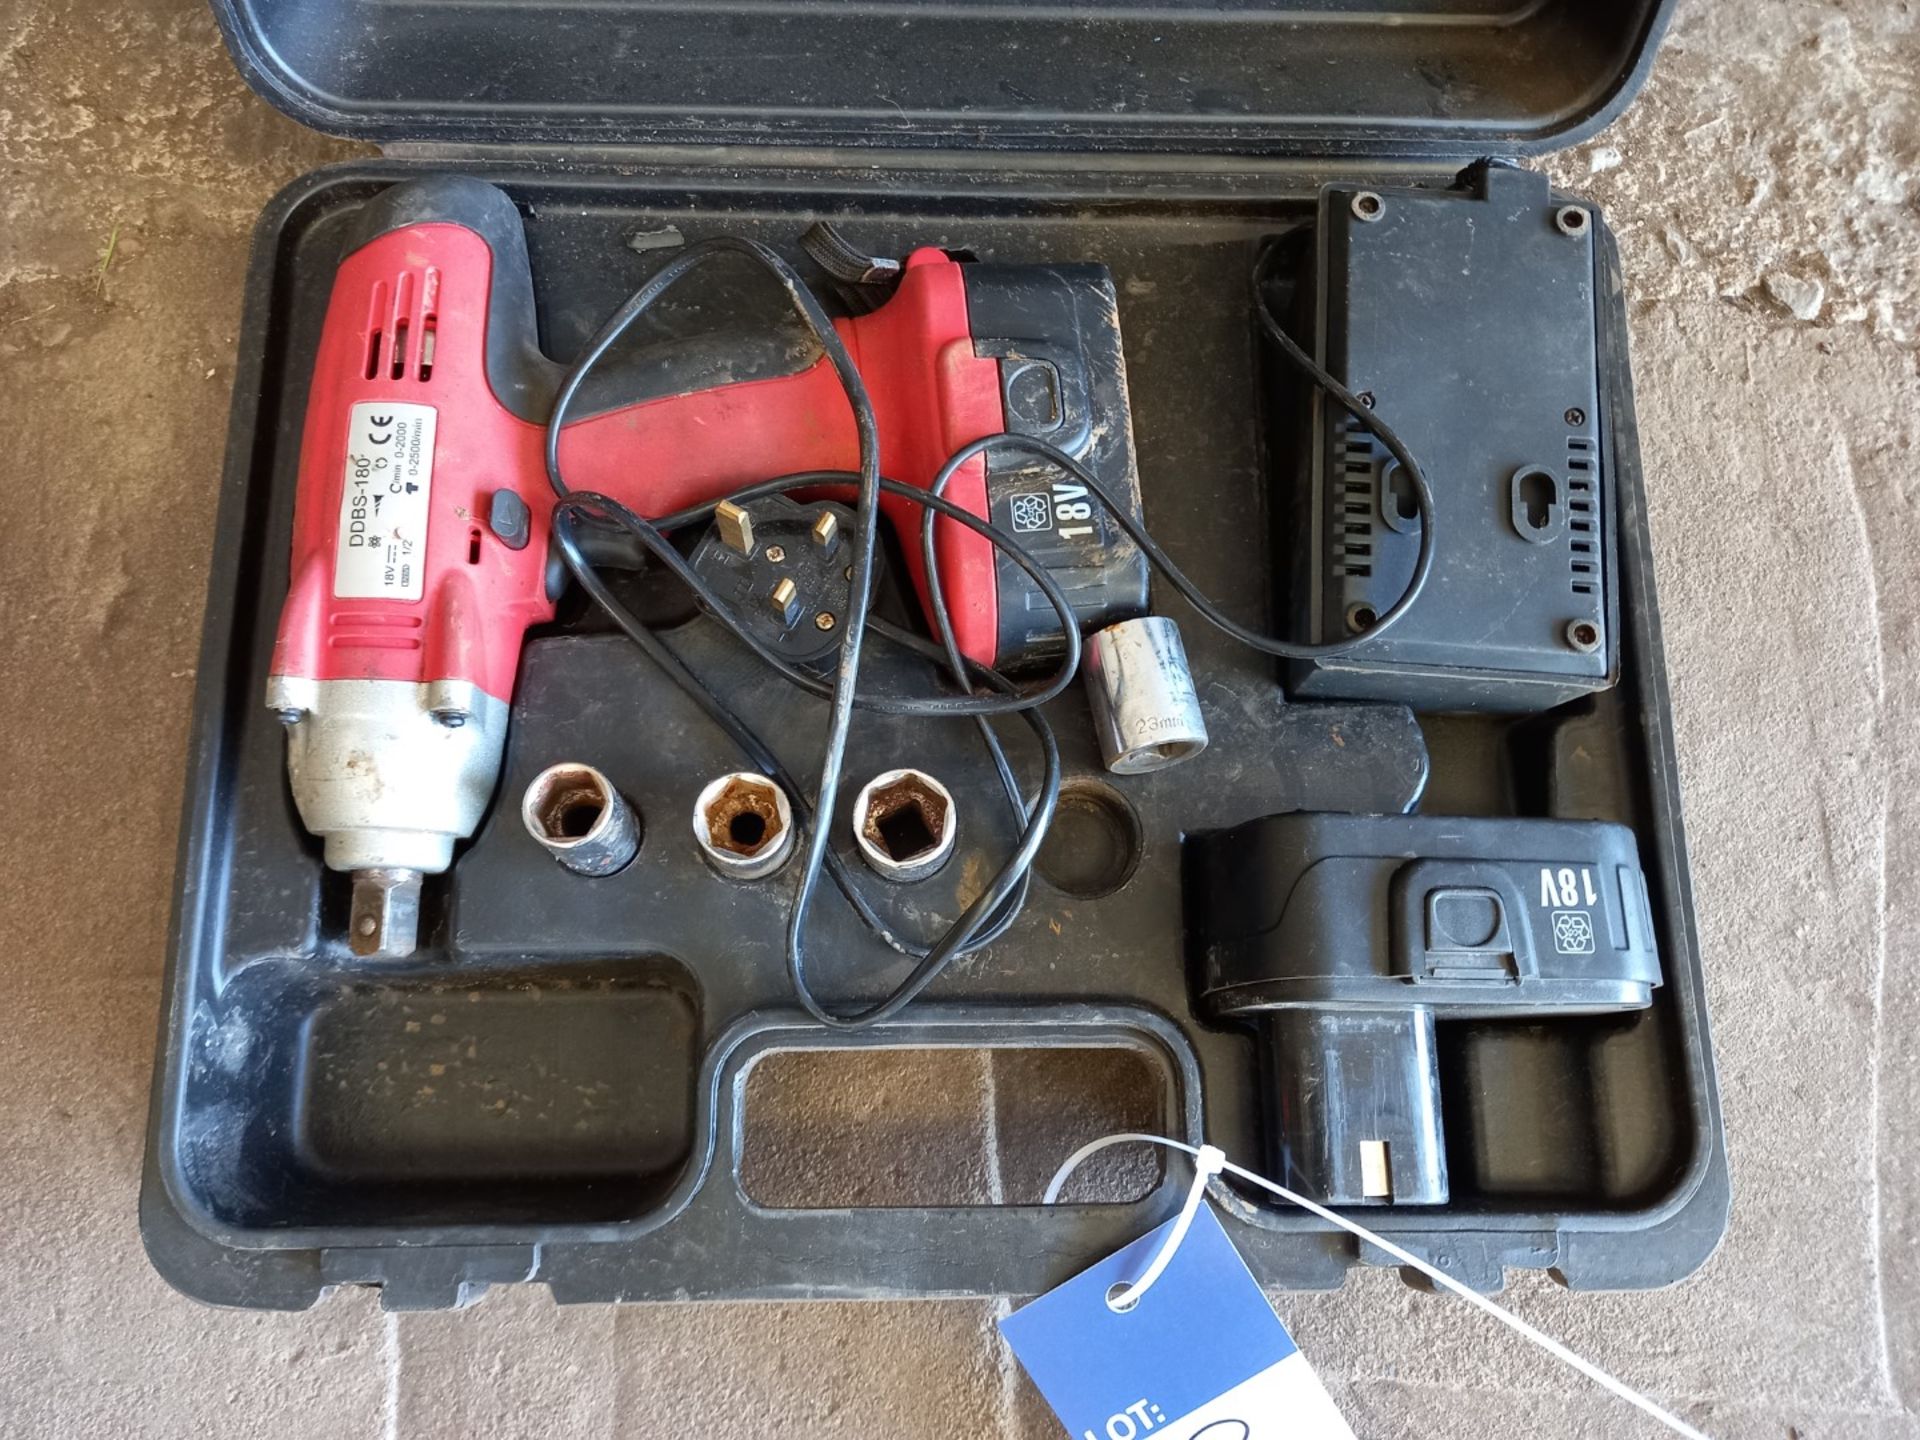 DDBS-180 Cordless Impact Driver, to case